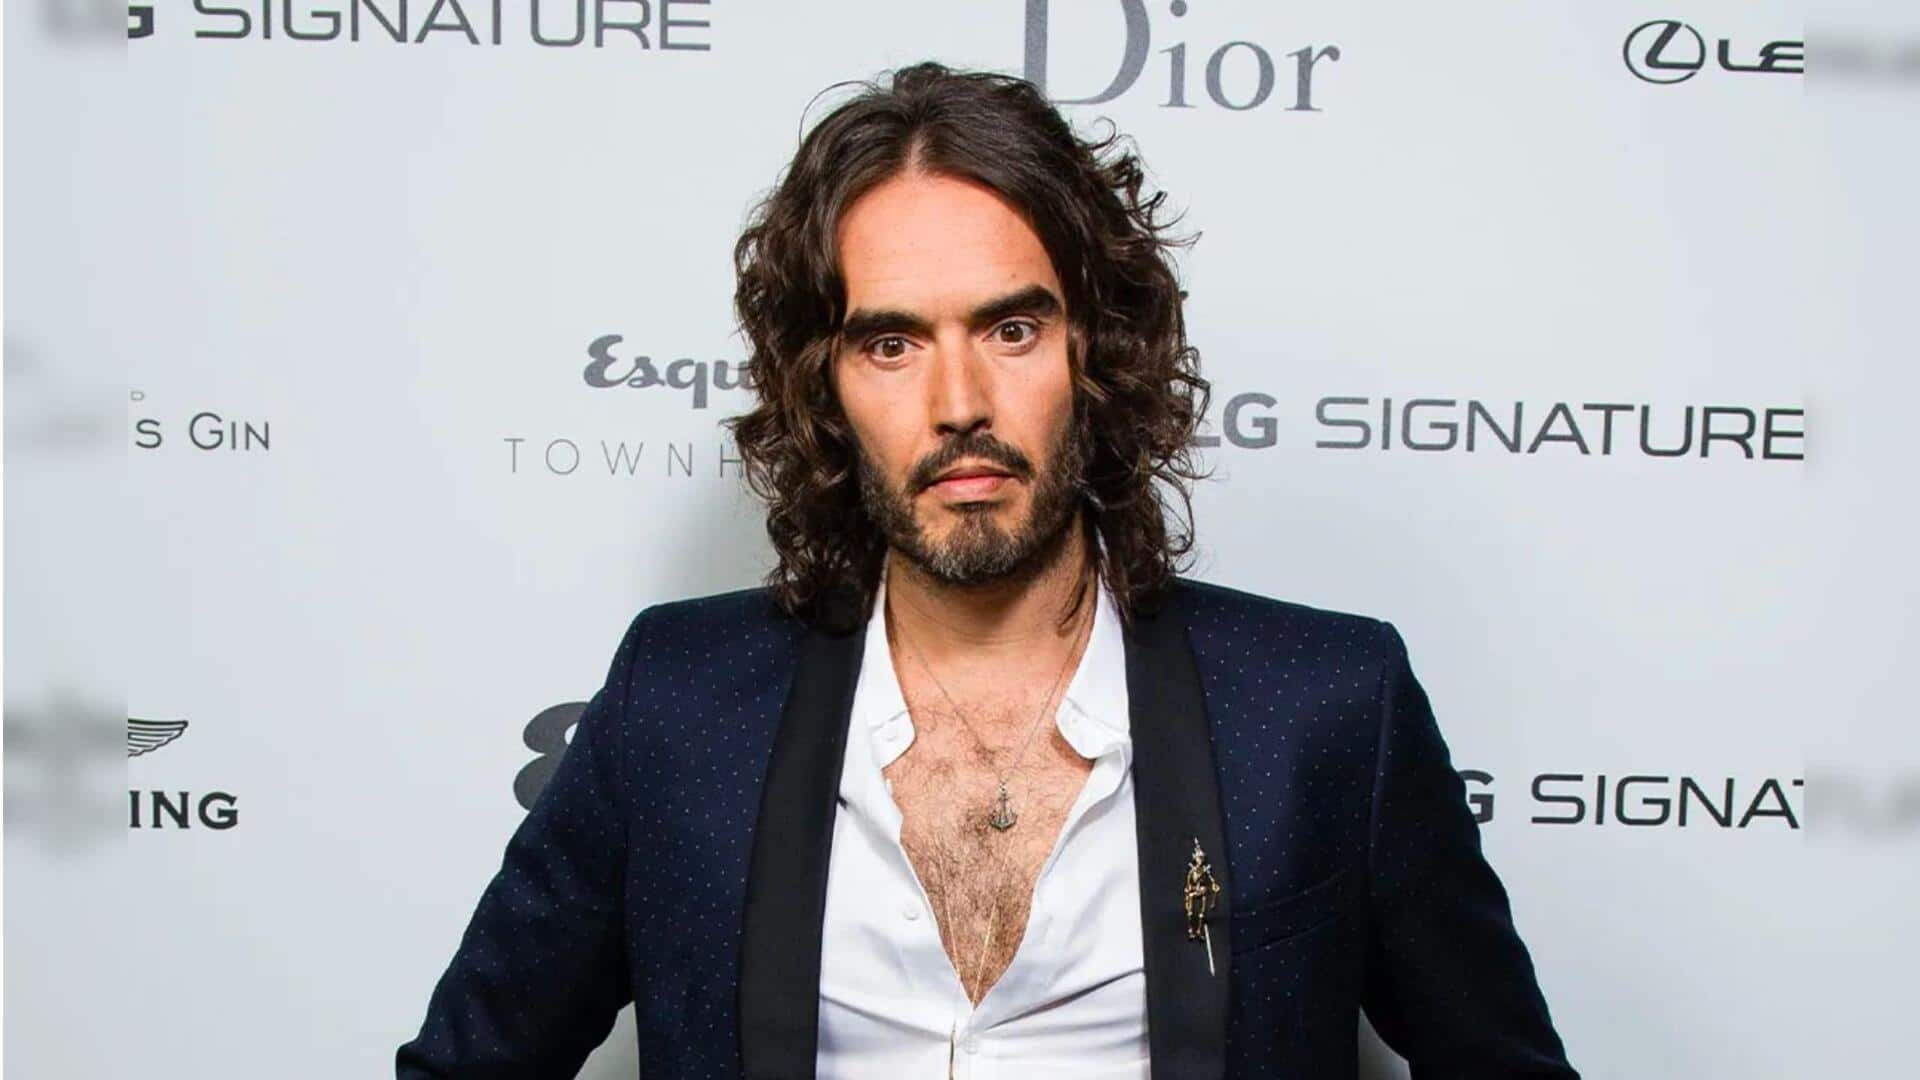 Russell Brand accused of rape, sexual assault: Everything about case